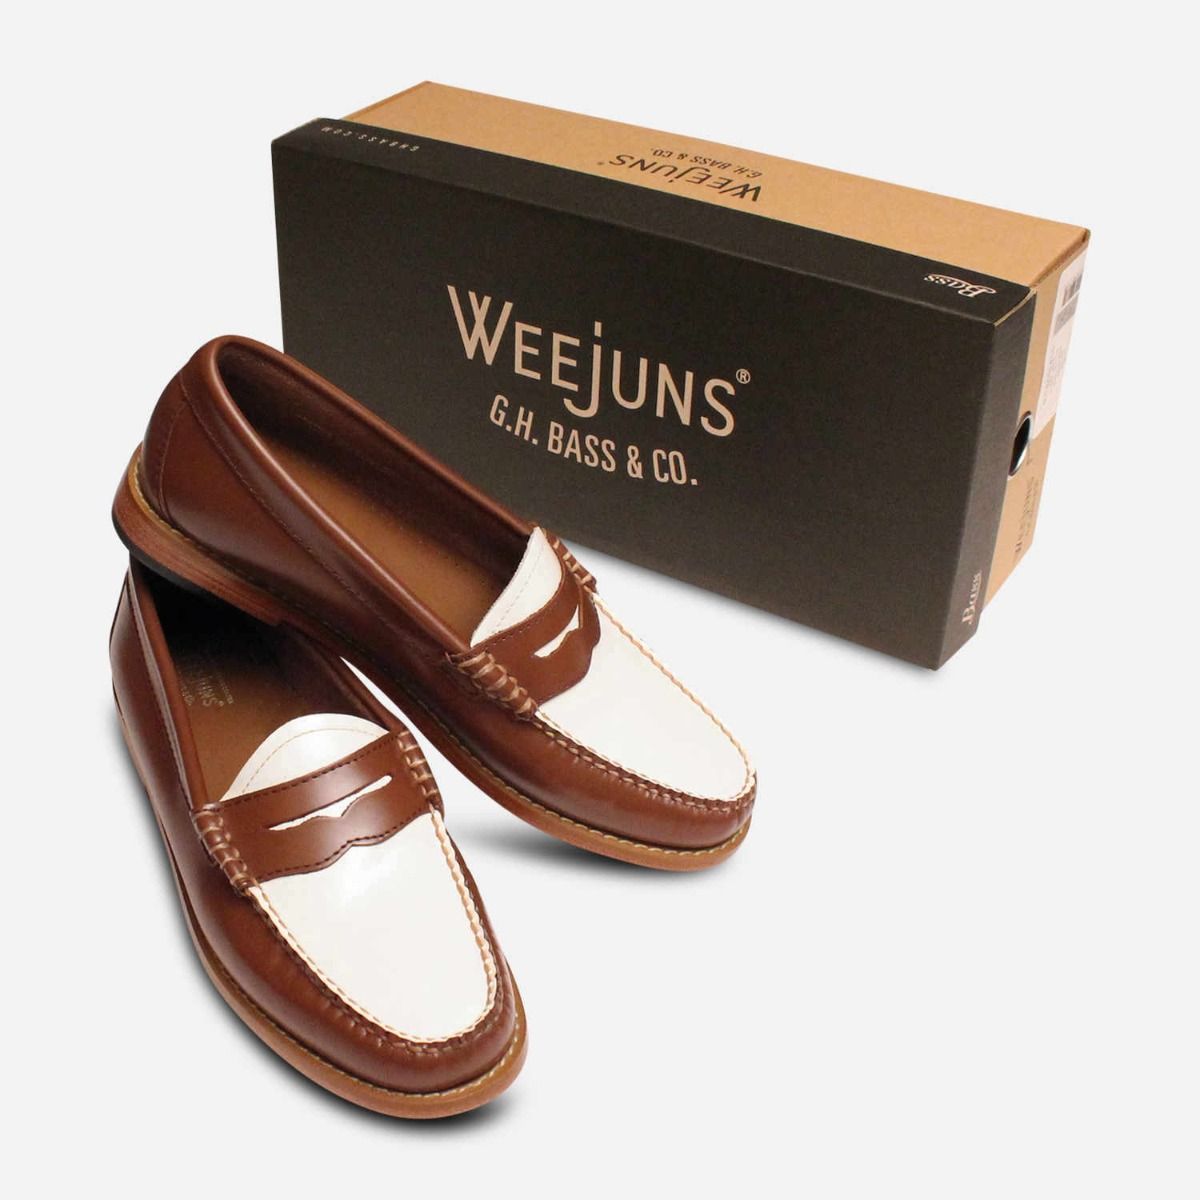 Bass Weejuns Edition Brown & White Penny Loafers